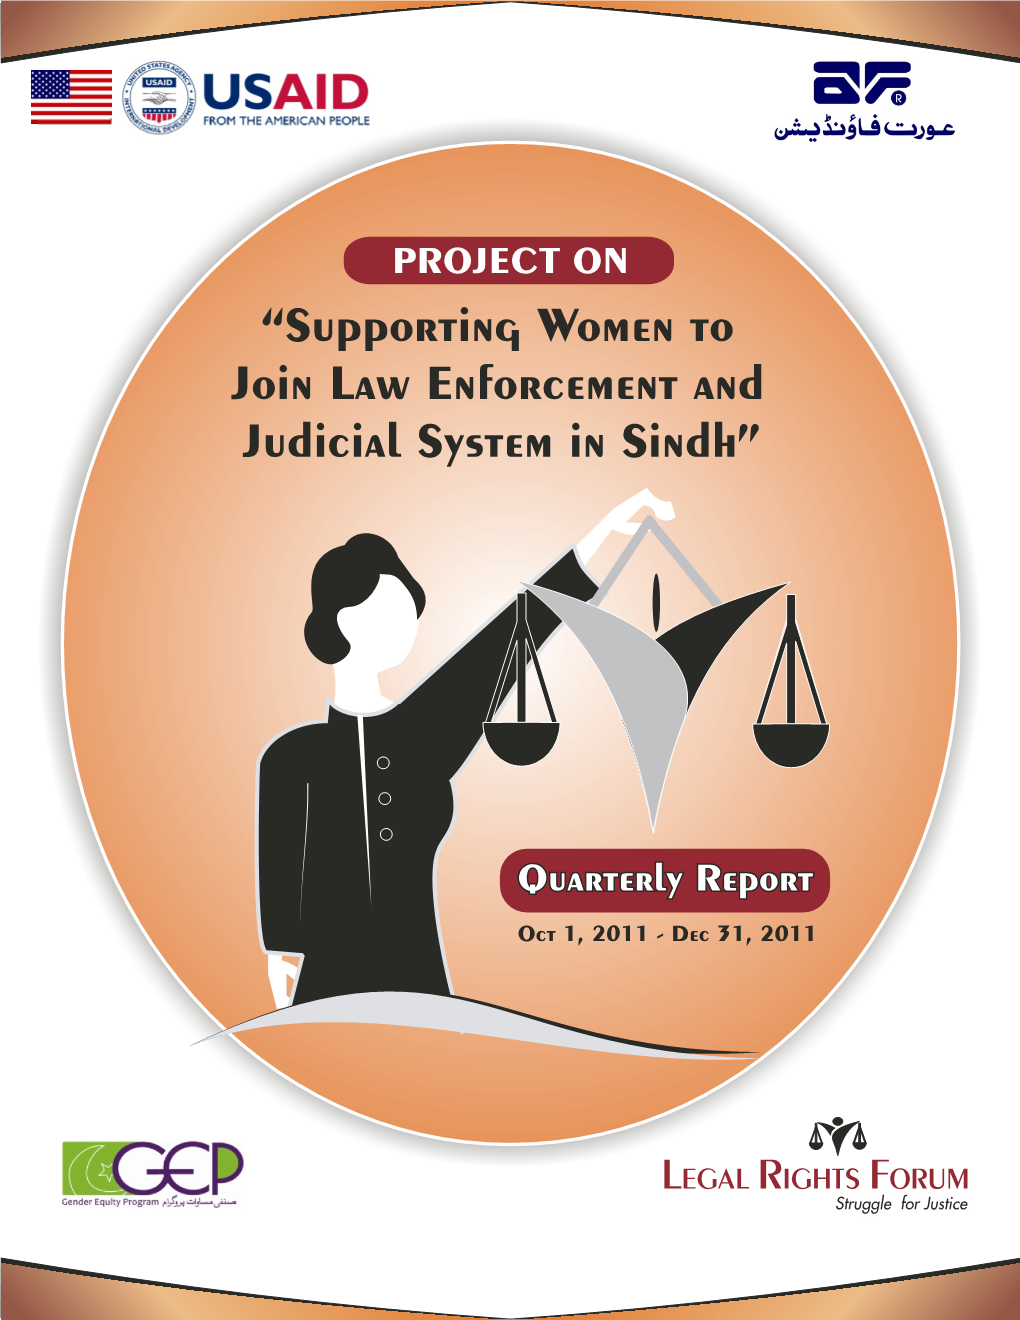 “Supporting Women to Join Law Enforcement and Judicial System in Sindh”